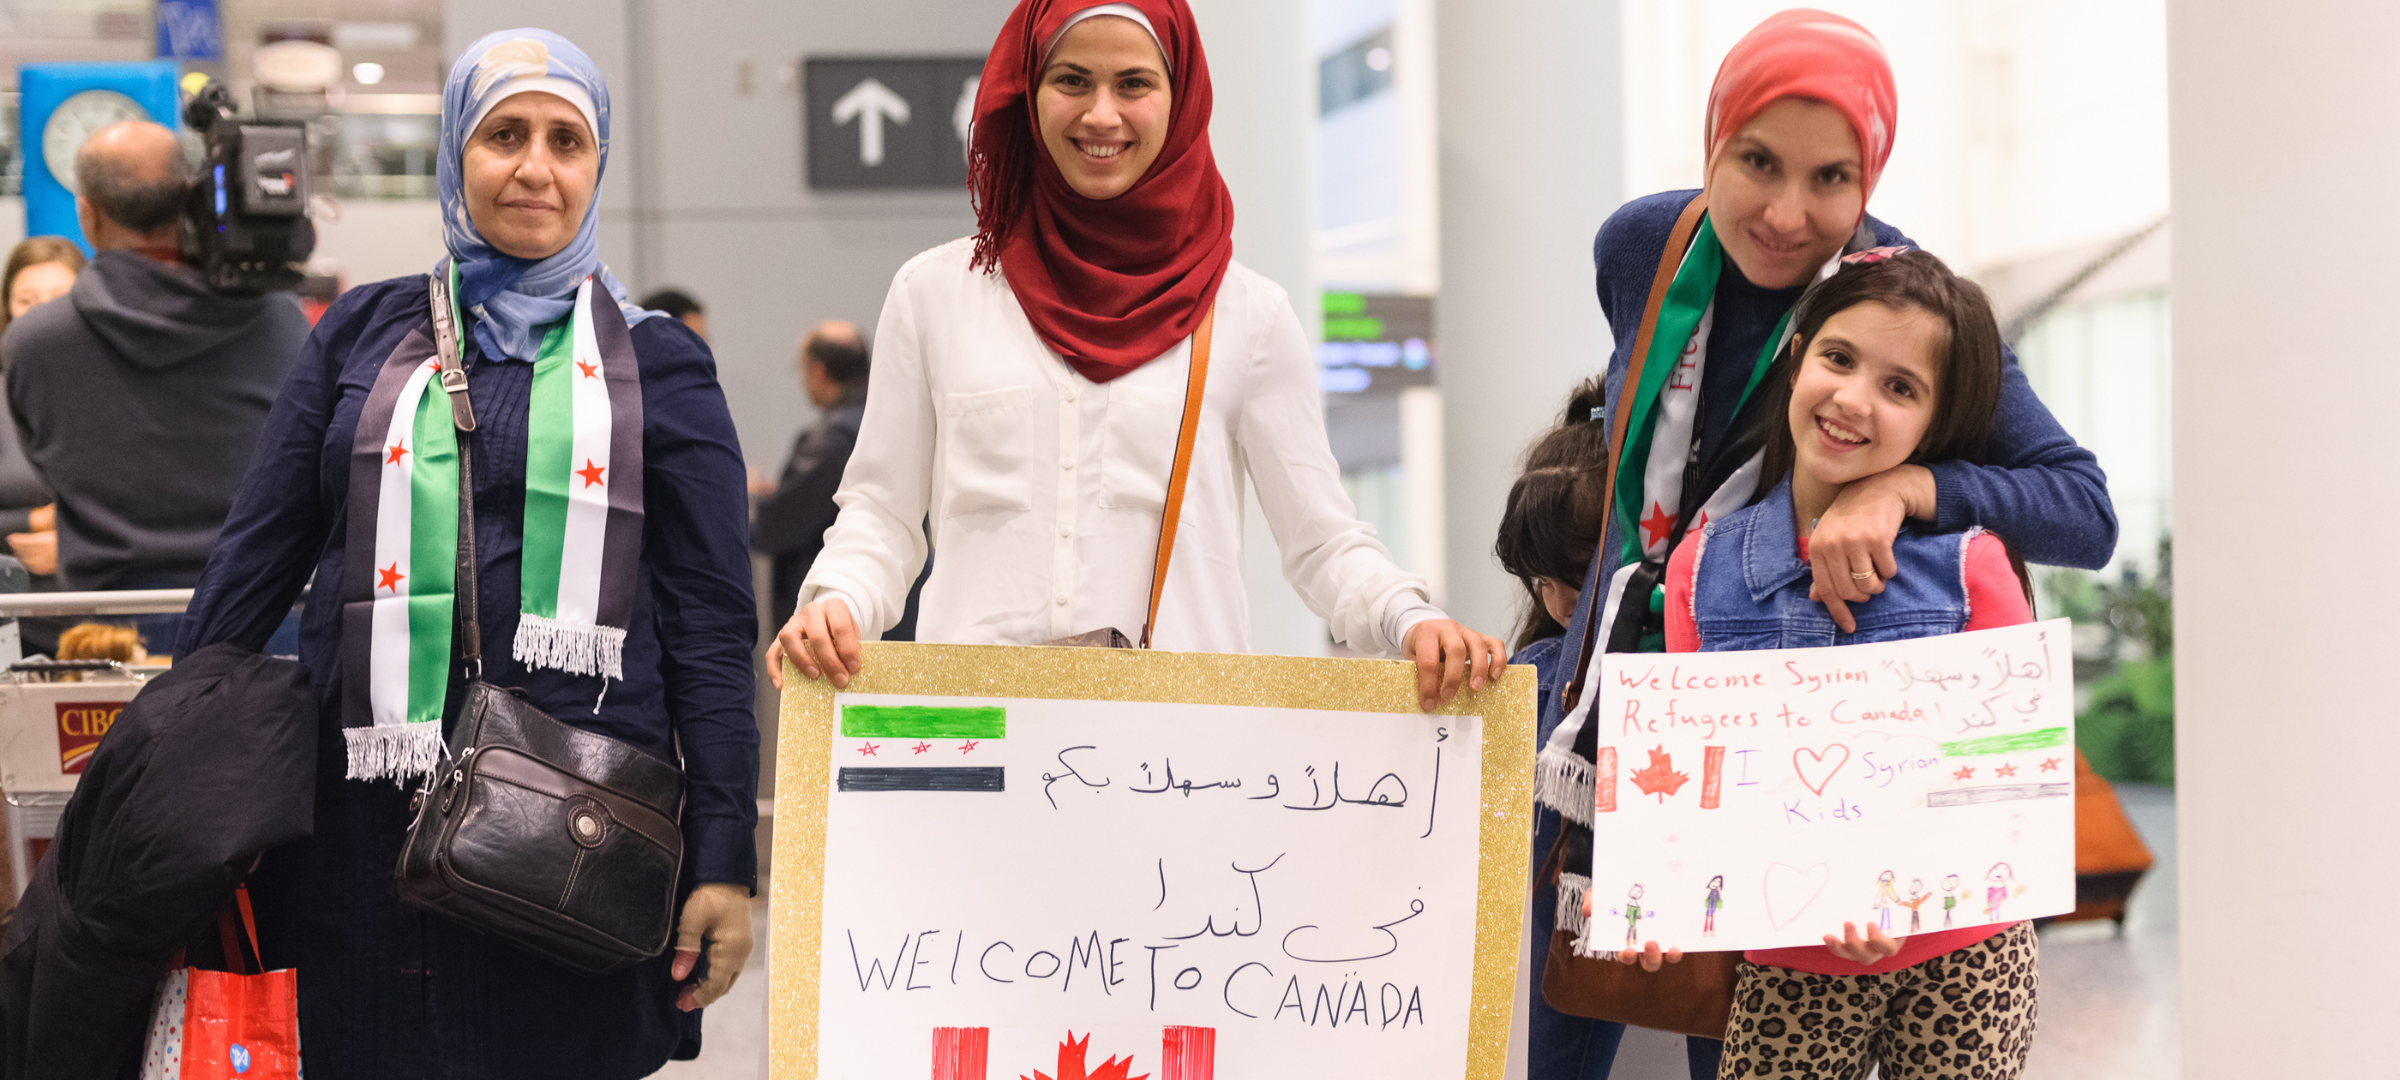 A group of women and a younger girl at the airport, holding welcome signs.